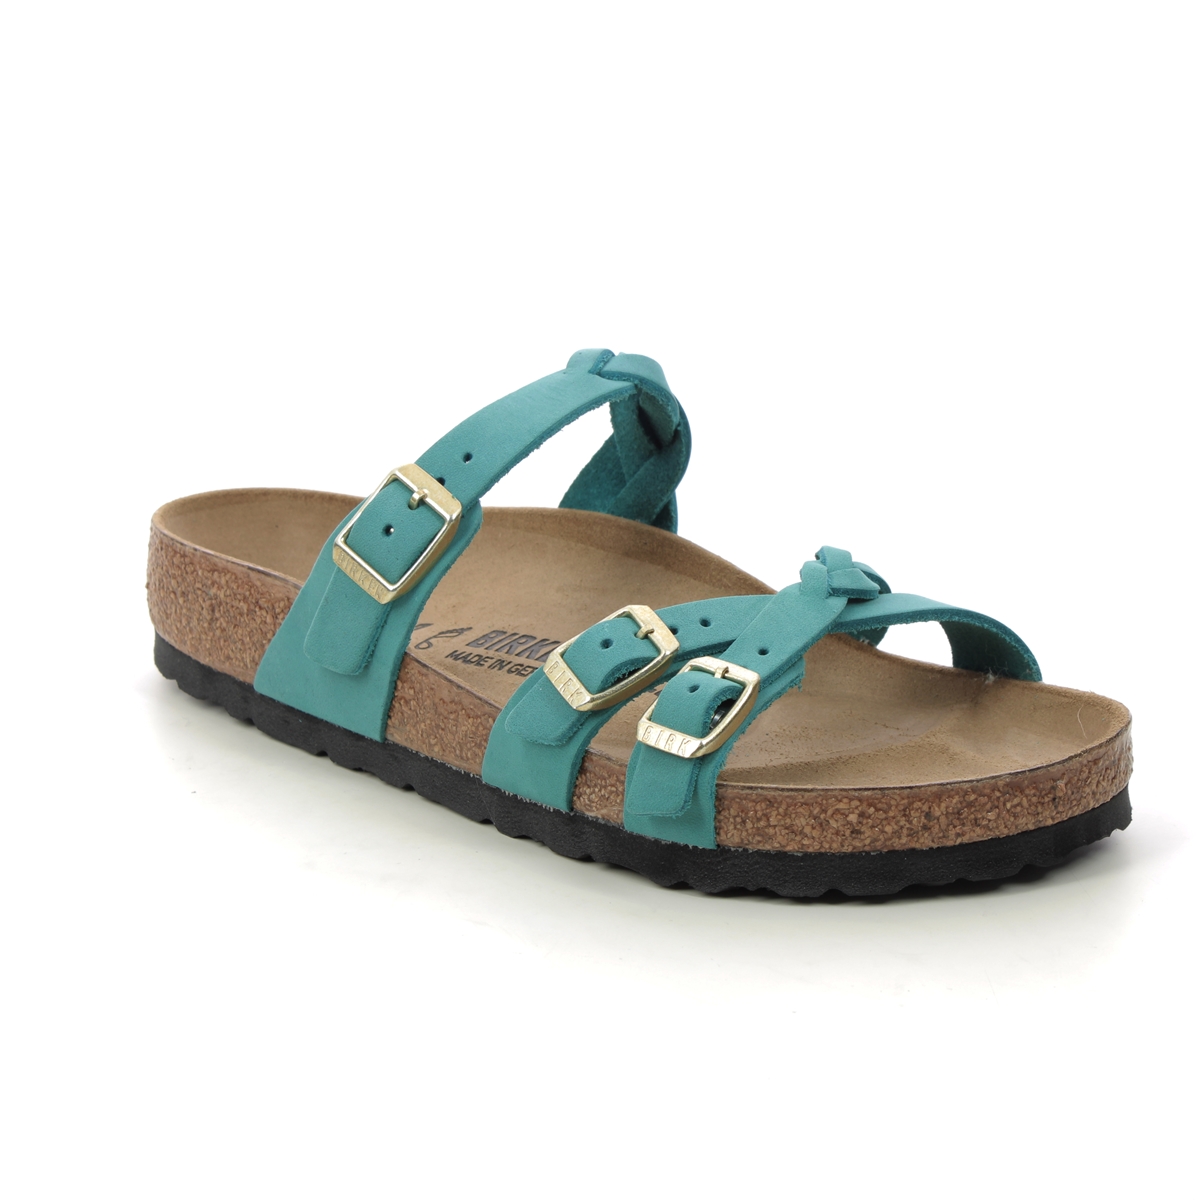 Birkenstock Franca Braided Turquoise Womens Slide Sandals 102630494 in a Plain Leather in Size 36